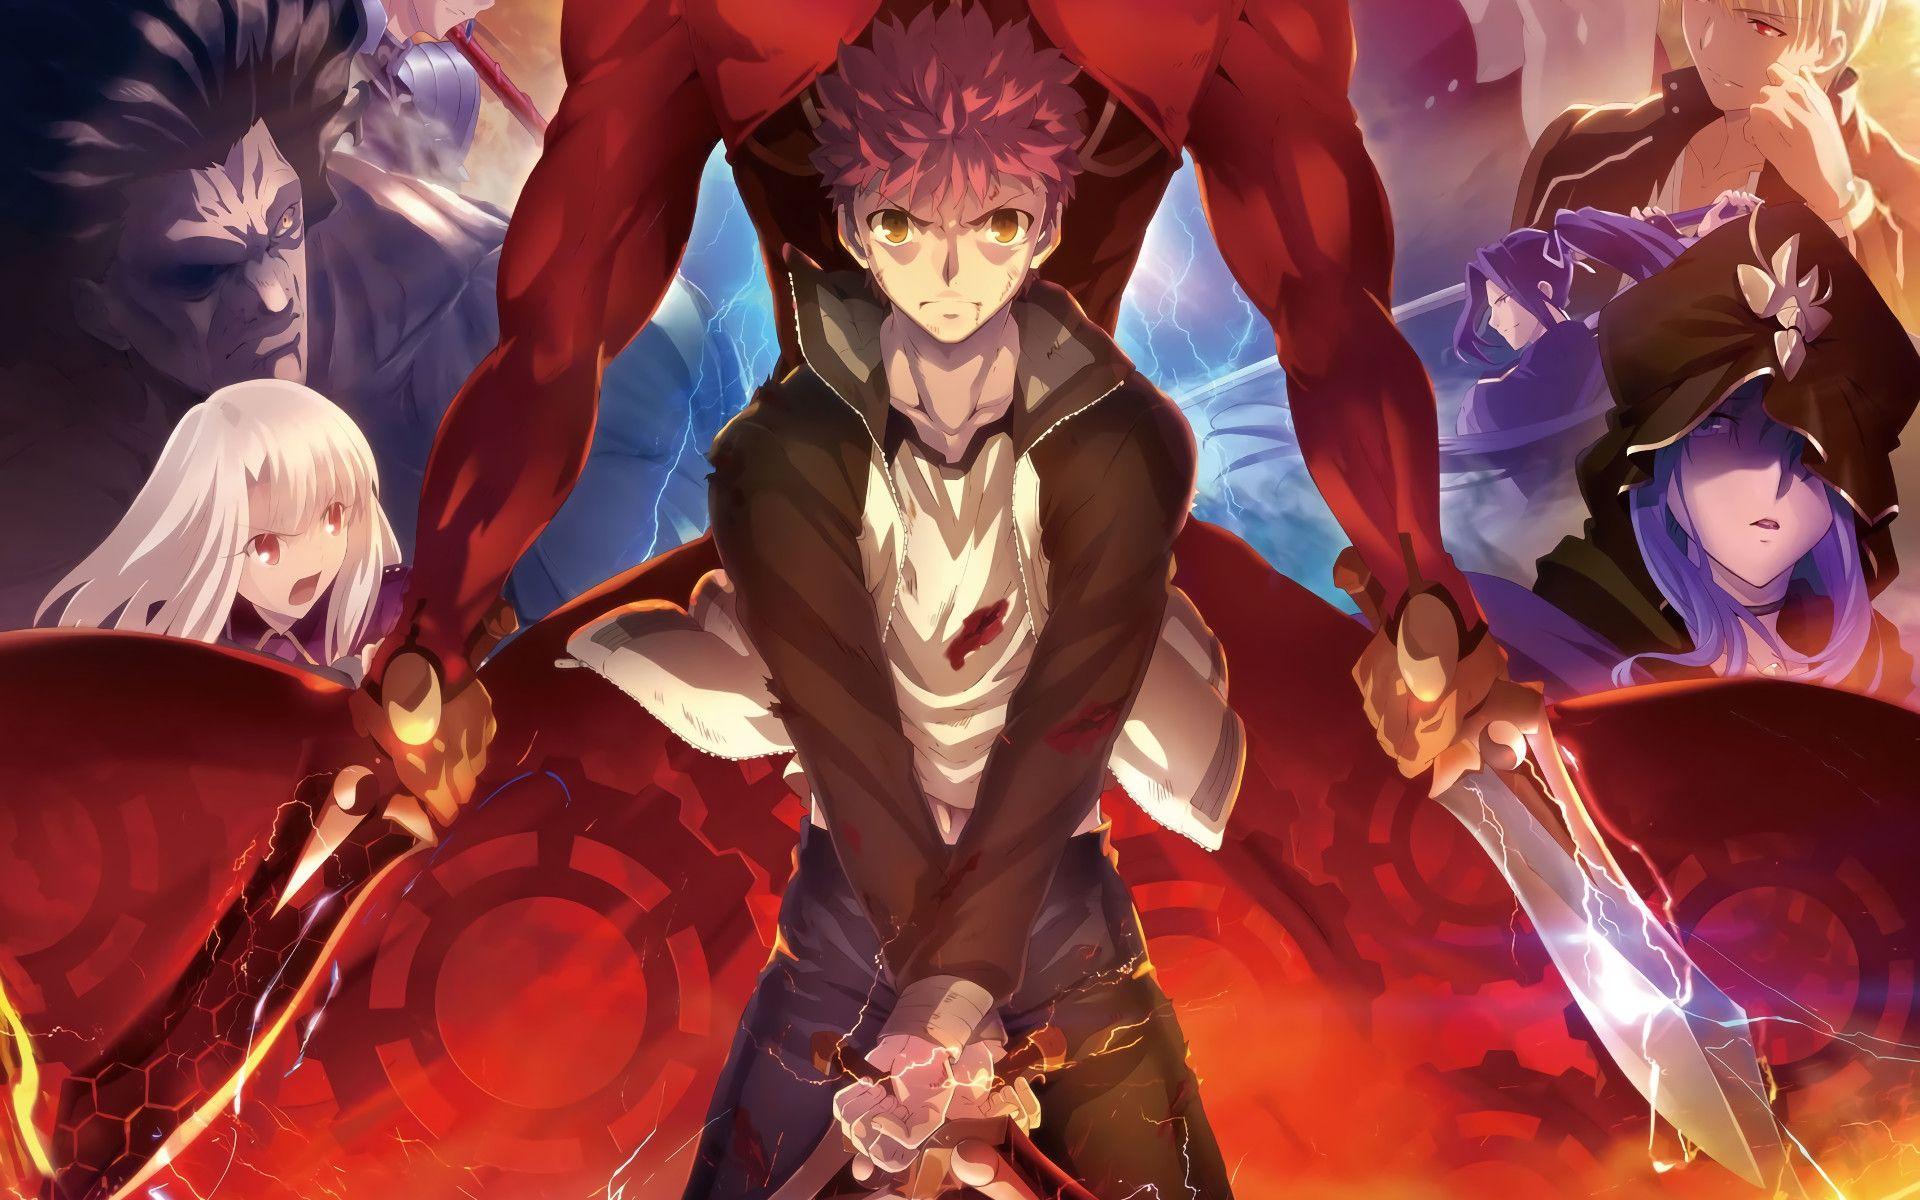 Fate/stay night: Unlimited Blade Works Wallpapers - Top Free Fate/stay